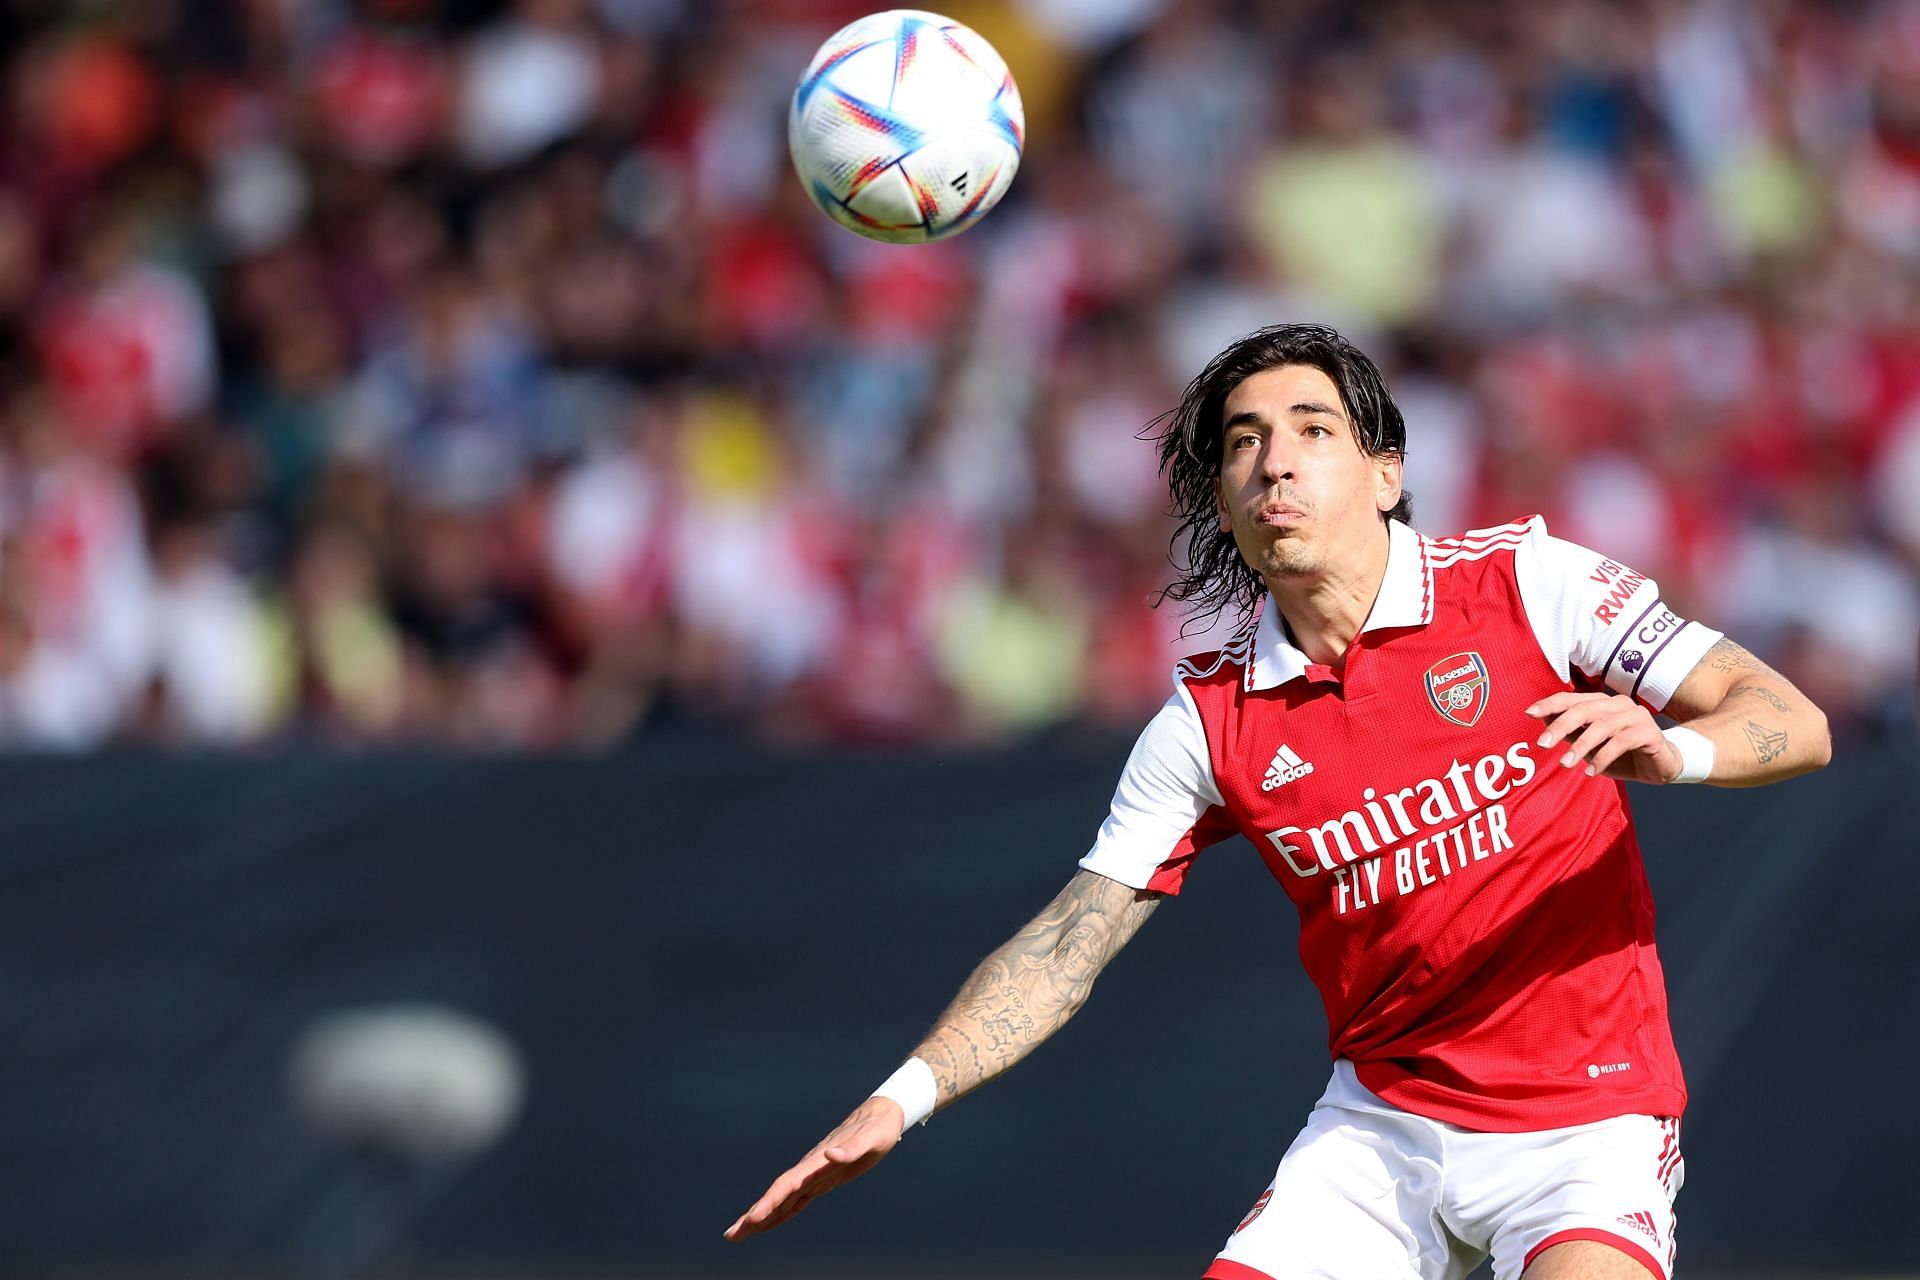 Hector Bellerin might leave Arsenal soon